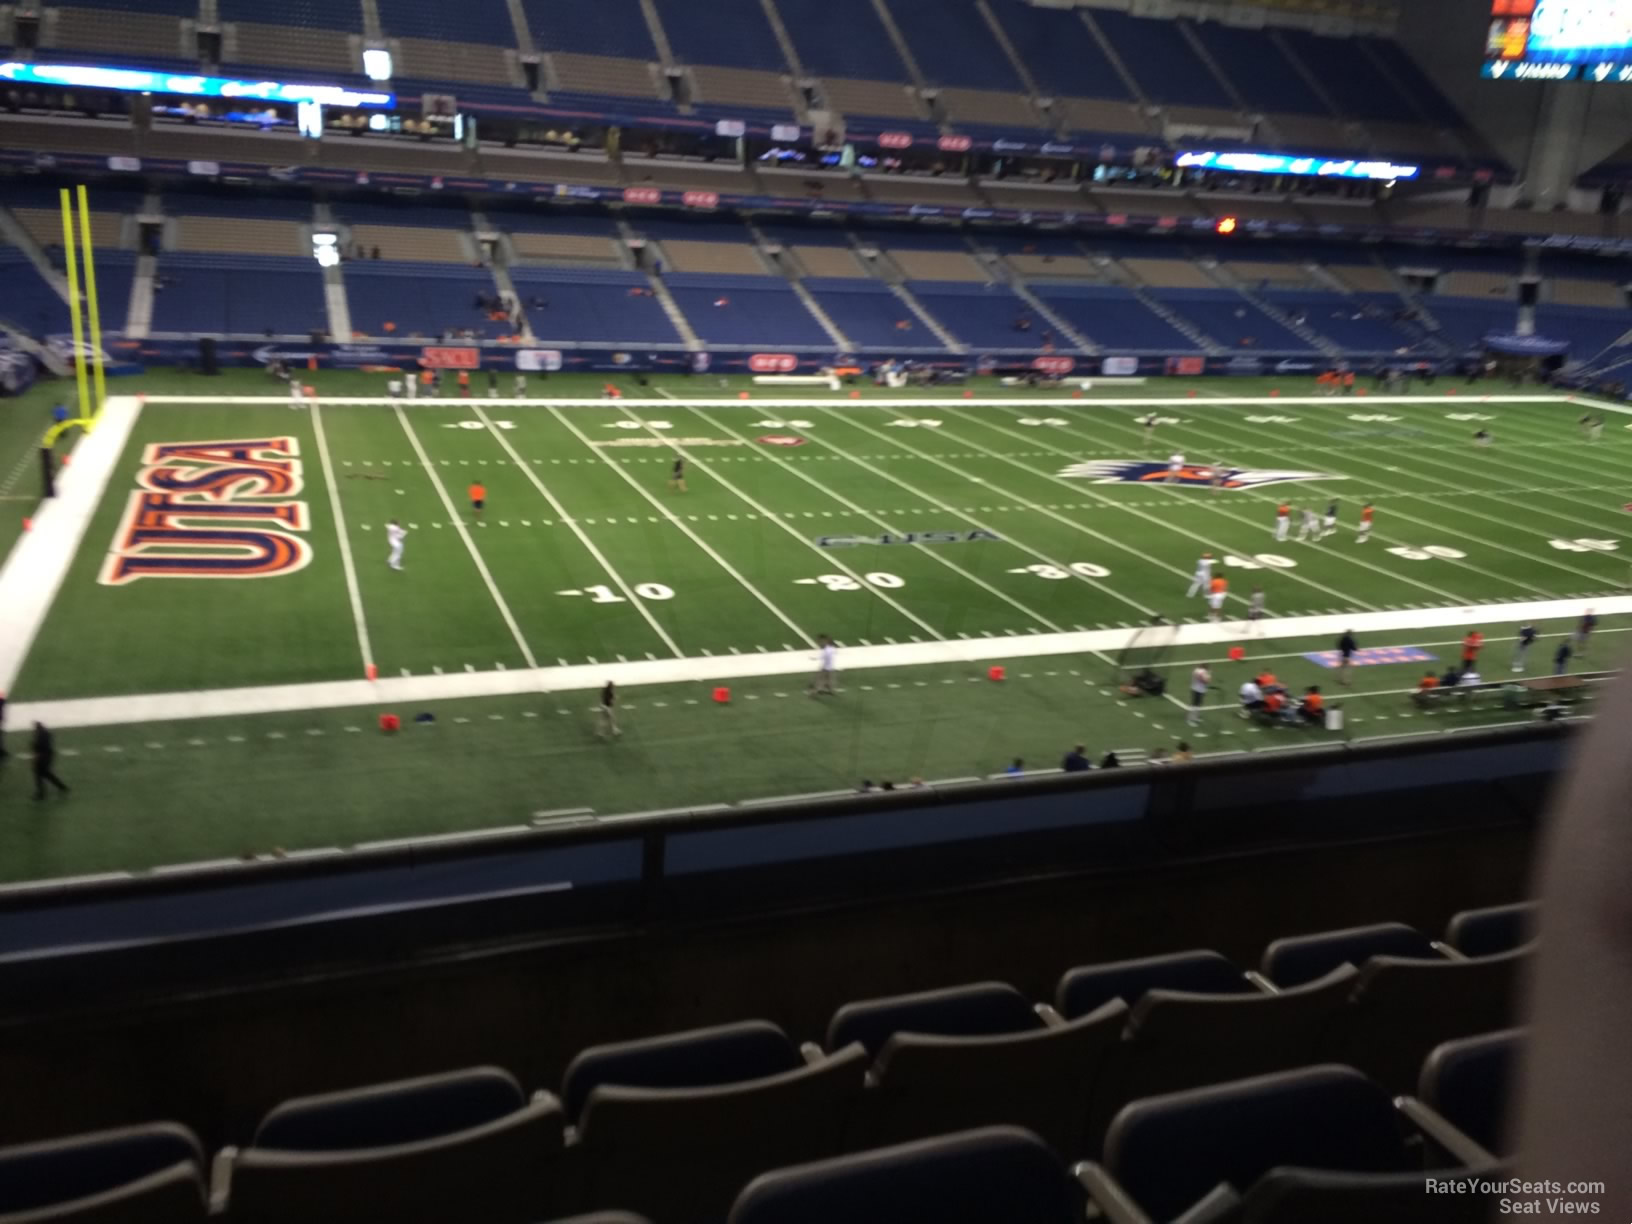 section 216, row 5 seat view  for football - alamodome